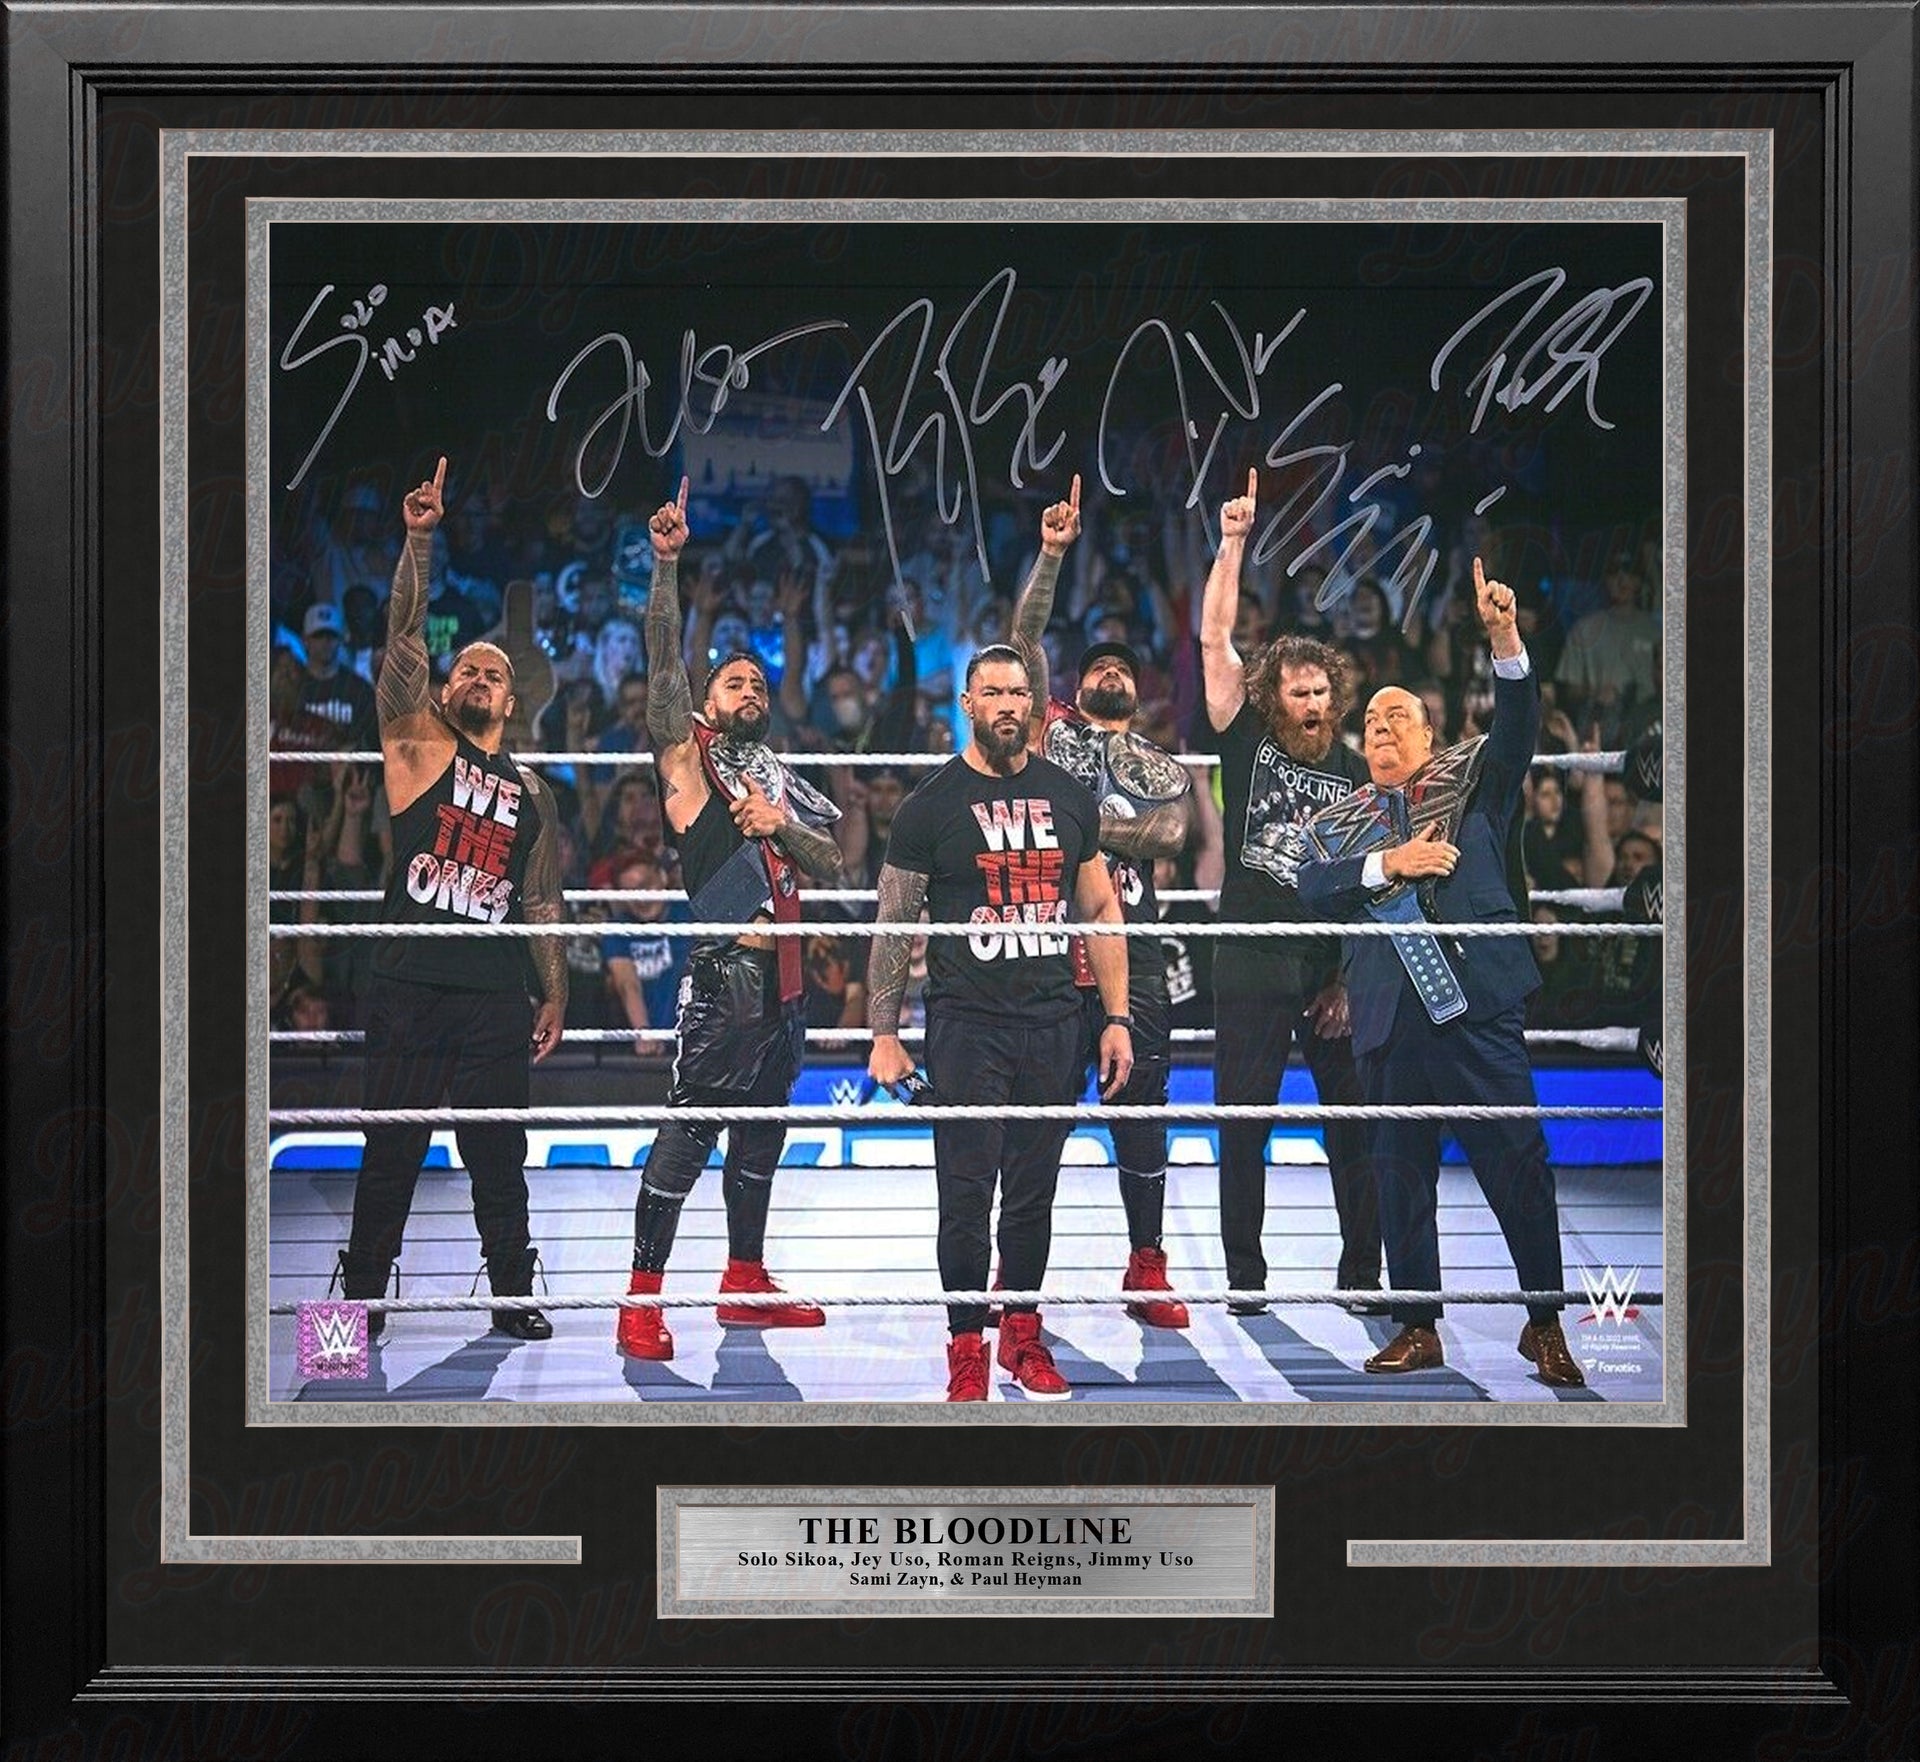 Roman Reigns & The Bloodline Autographed 16" x 20" Framed WWE Wrestling Photo - Dynasty Sports & Framing 